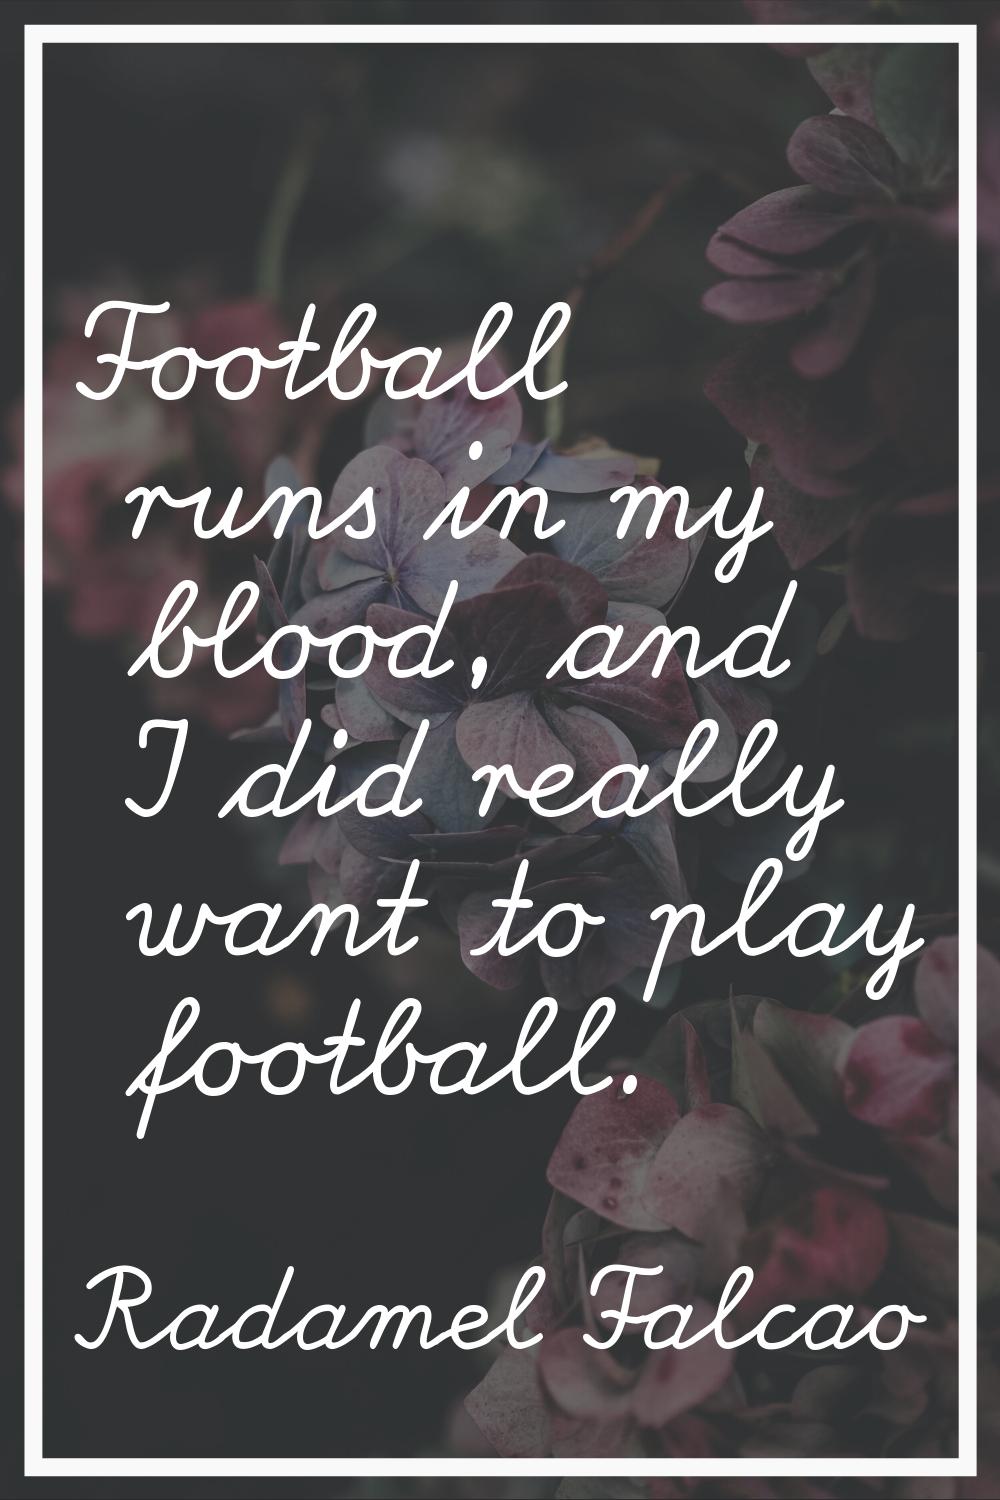 Football runs in my blood, and I did really want to play football.